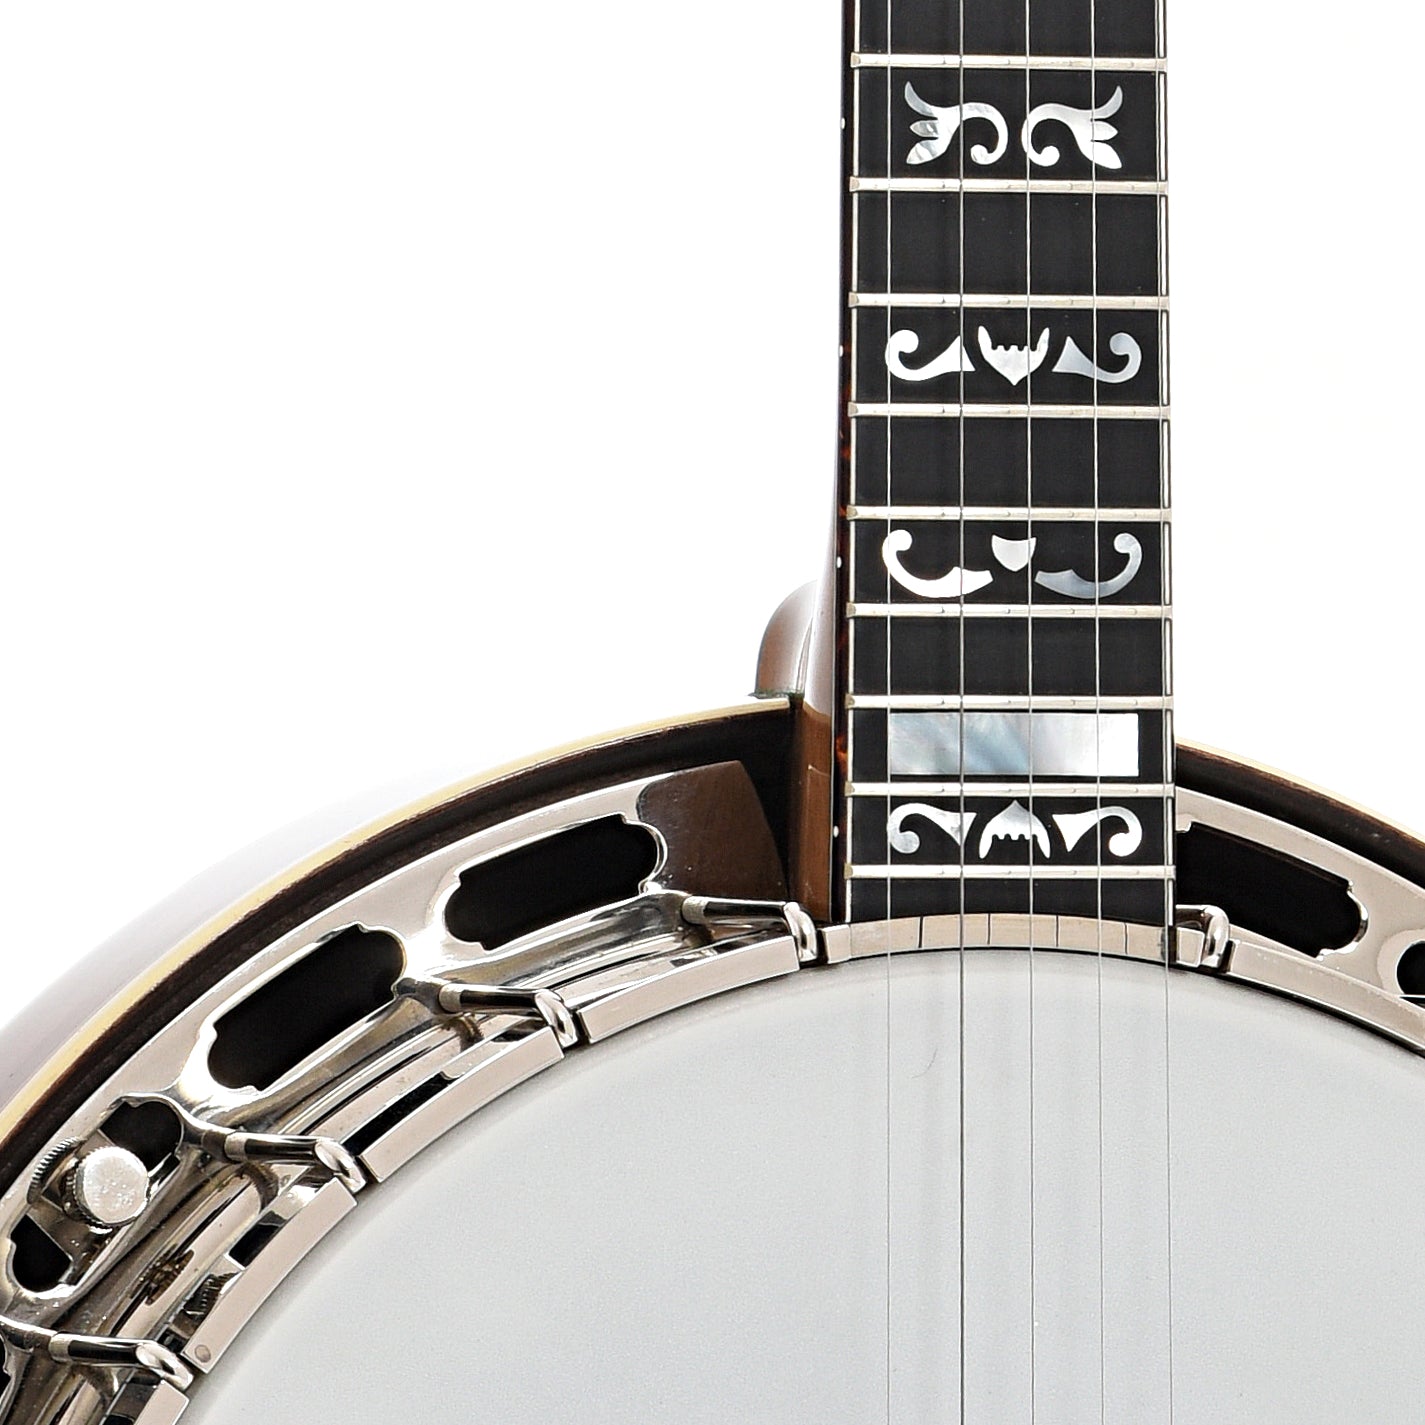 Front body and neck join of Prucha Walnut Parts banjo (c.2016)